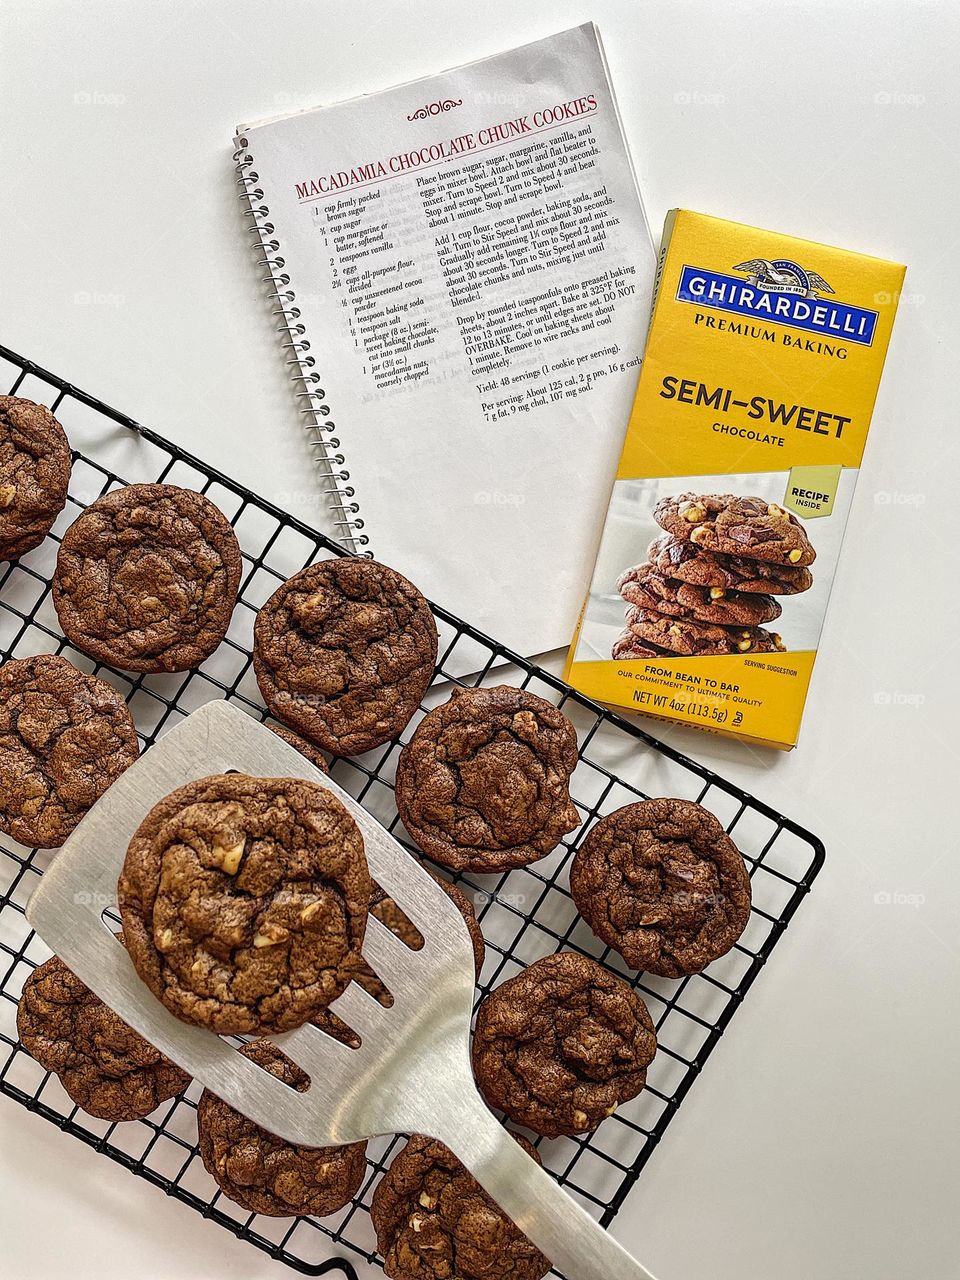 Making homemade cookies, baking Macadamia nut chocolate chunk cookies at home, making cookies with Ghirardelli’s chocolate, delicious cookies made from scratch, homemade cookies cooling on rack, placing cookies onto a cooling rack 